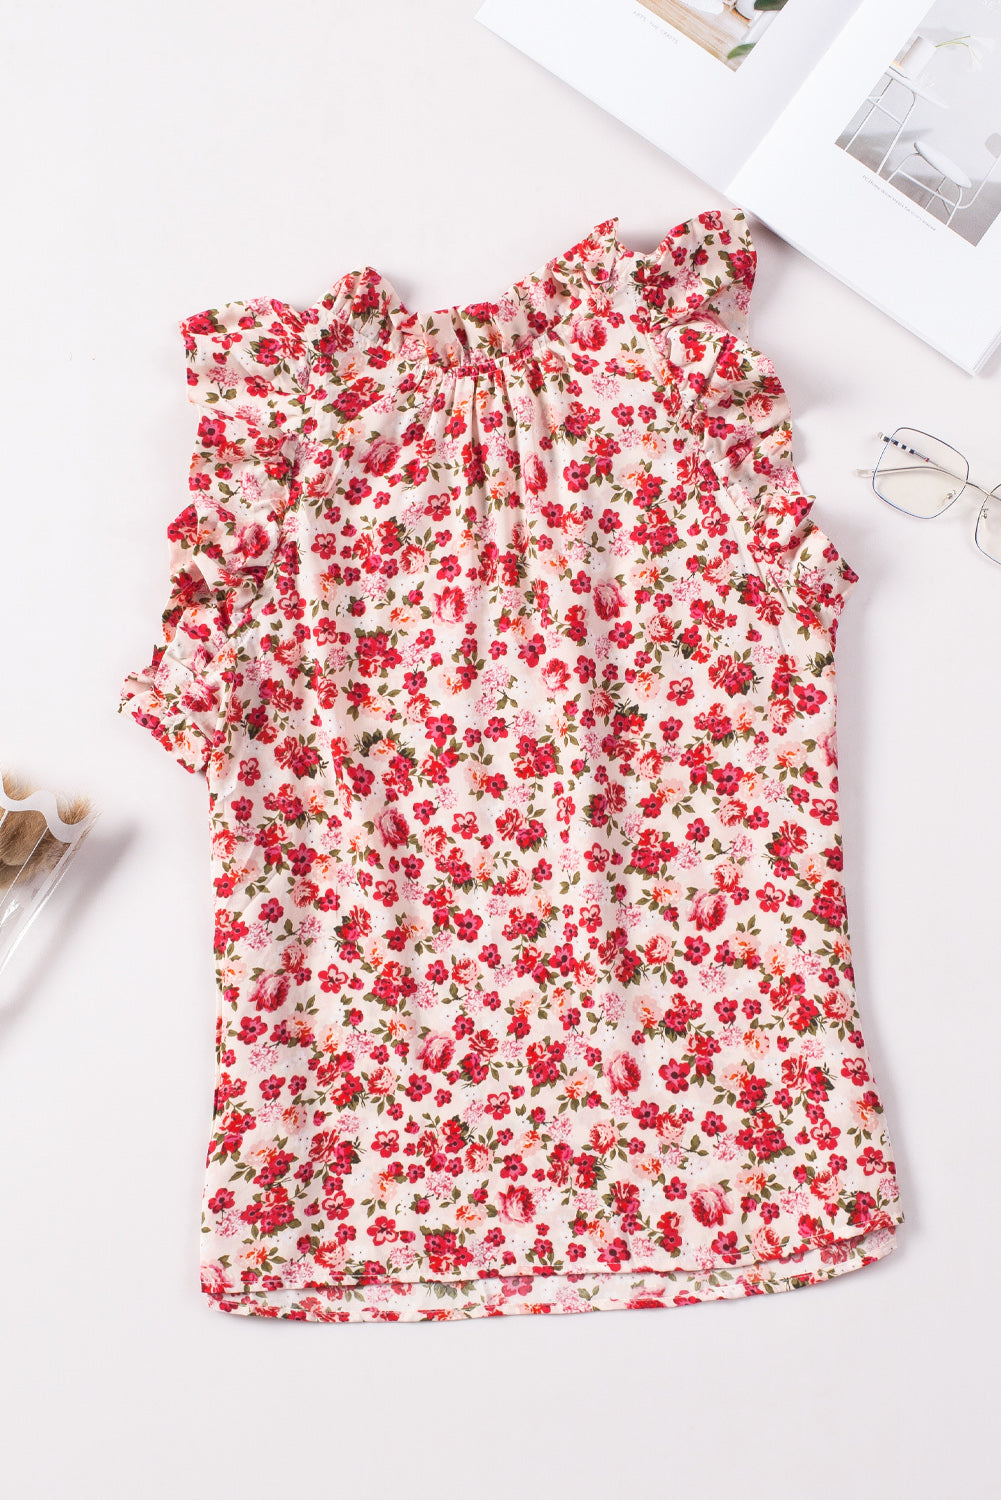 Fiery Red Floral Print Ruffled Mock Neck Sleeveless Top